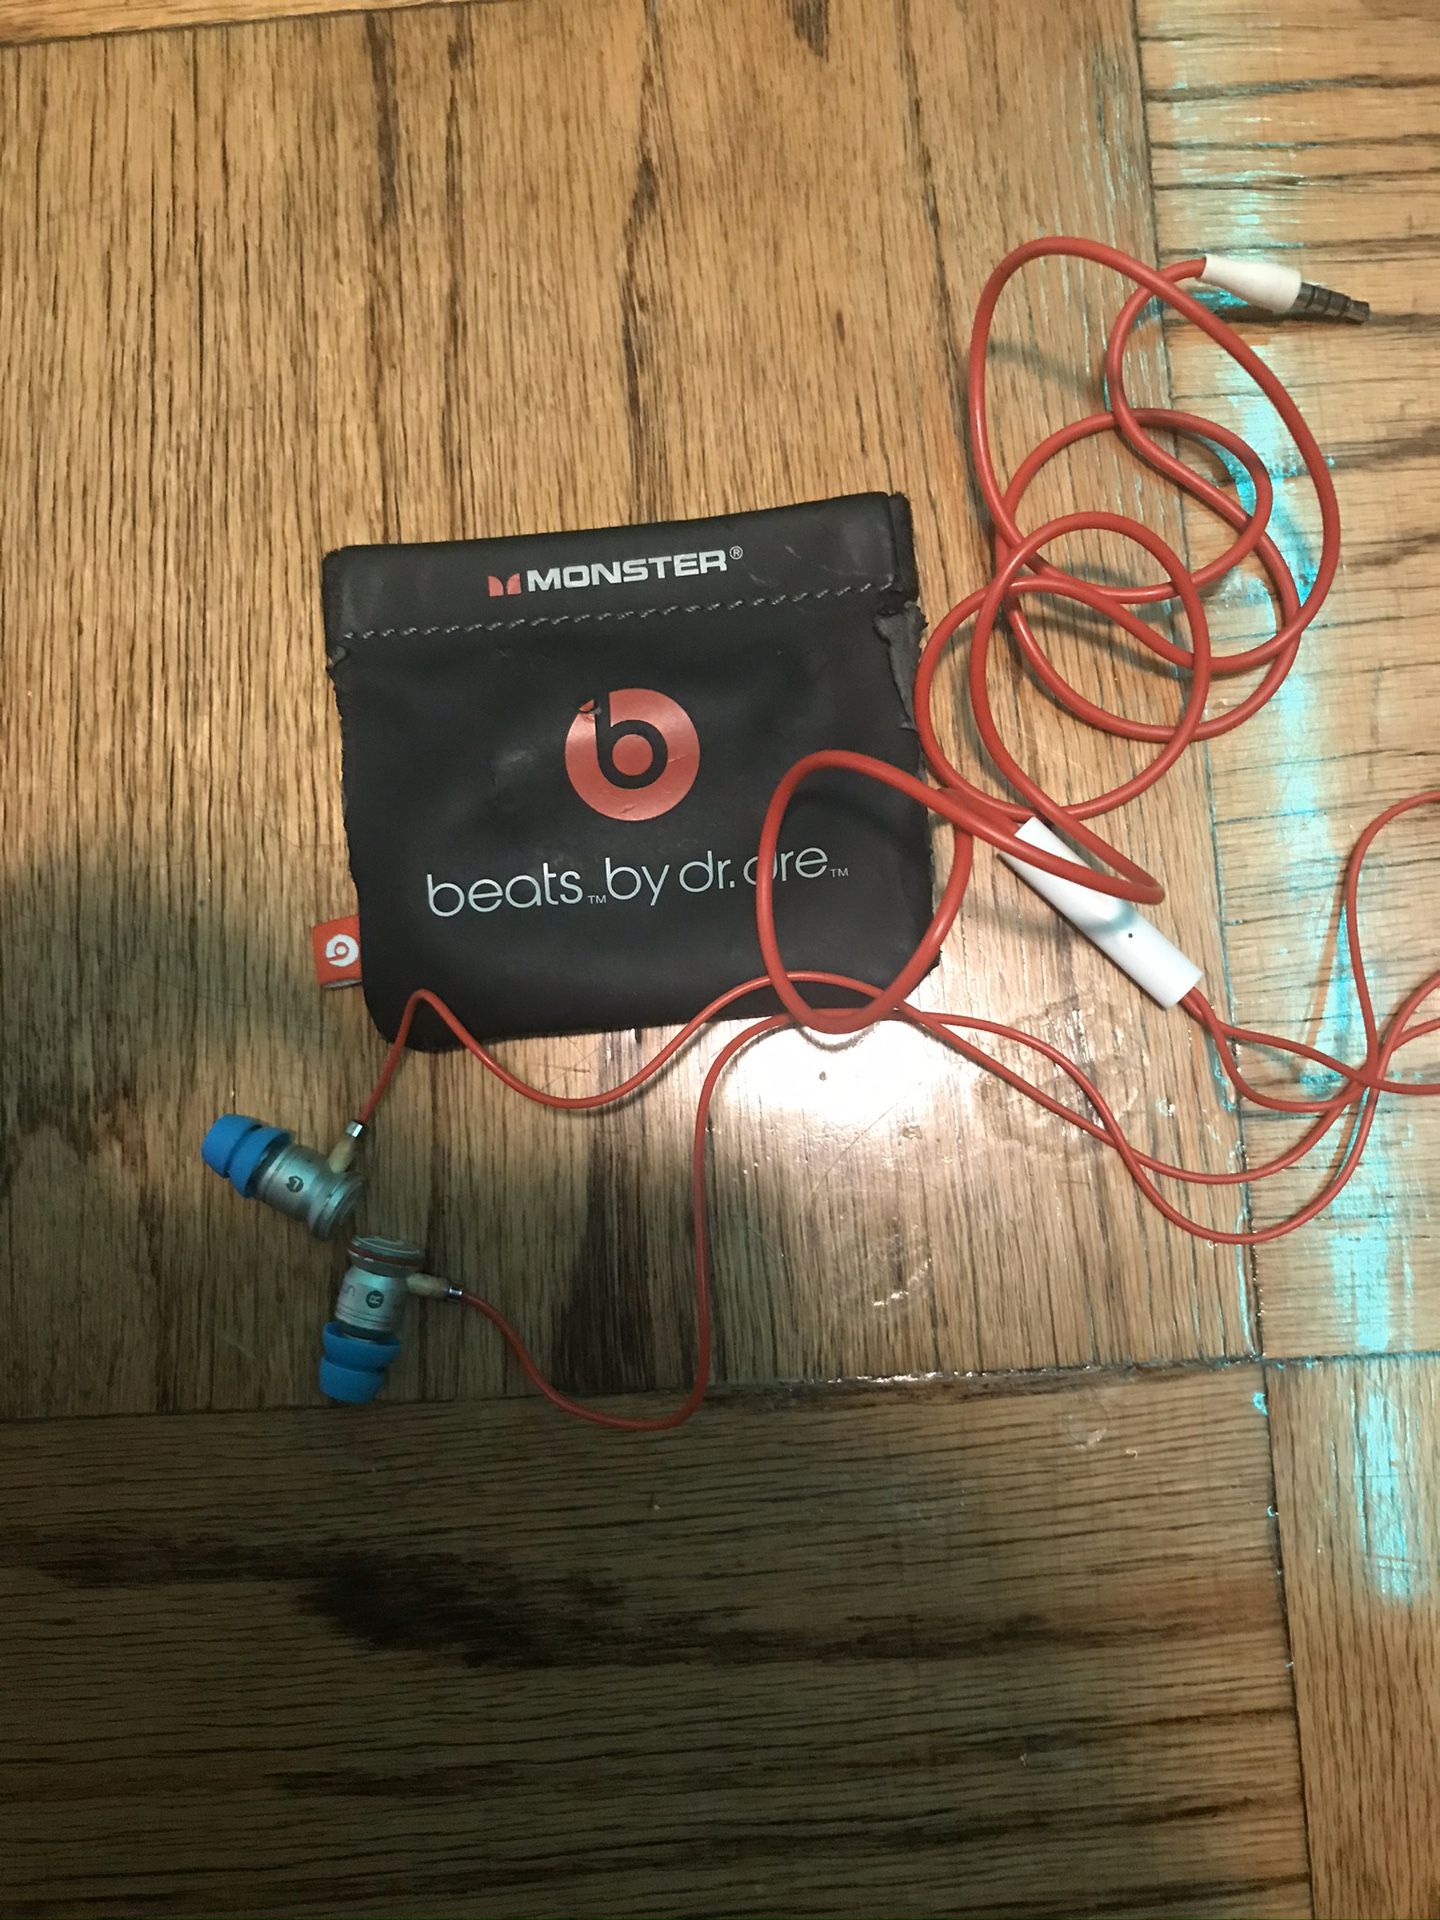 Beats by dr.dre wired headphones